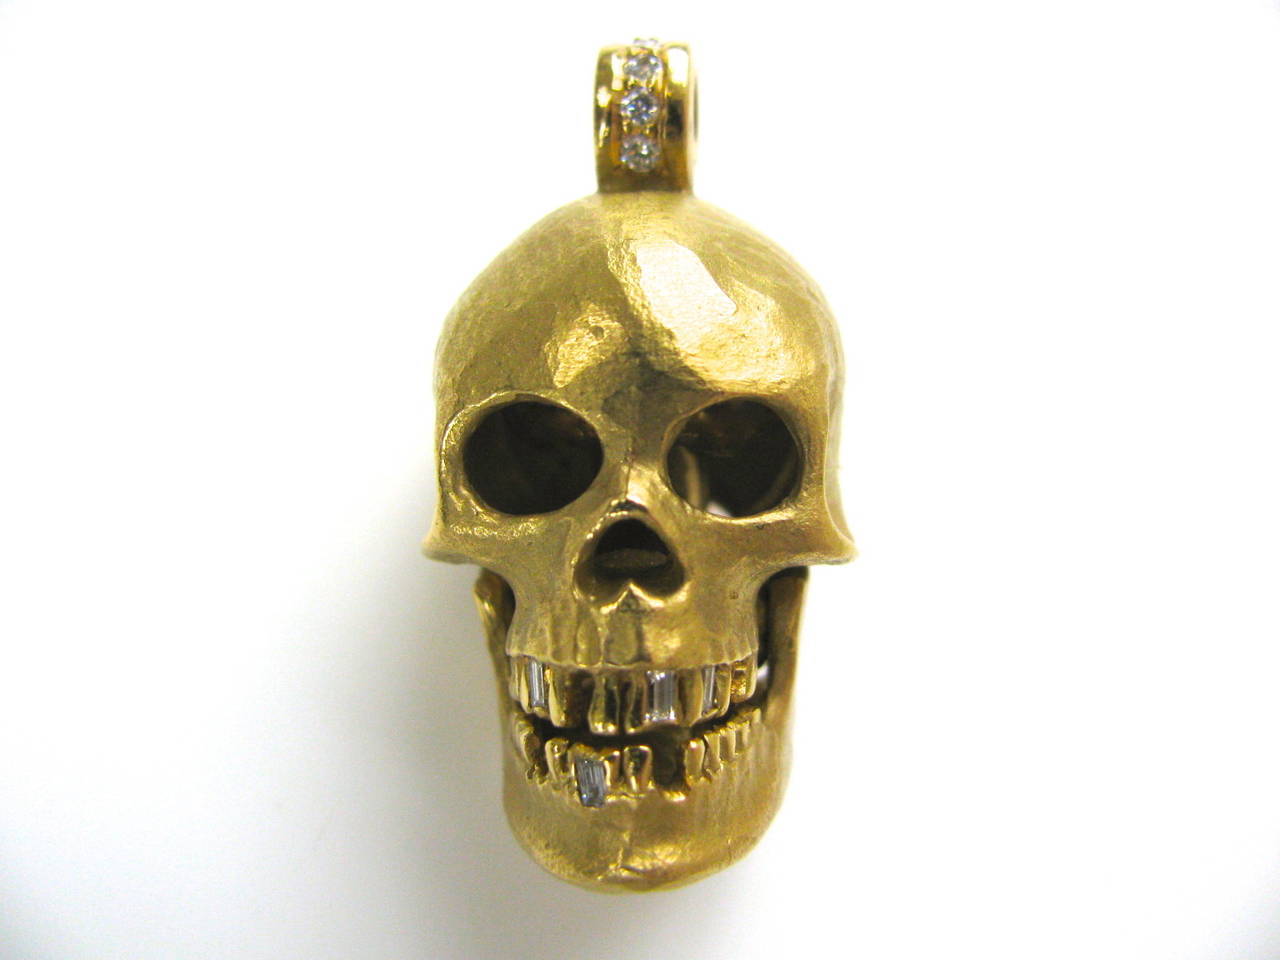 A Wicked Gold and Diamond Skull Pendant. The 1 1/2